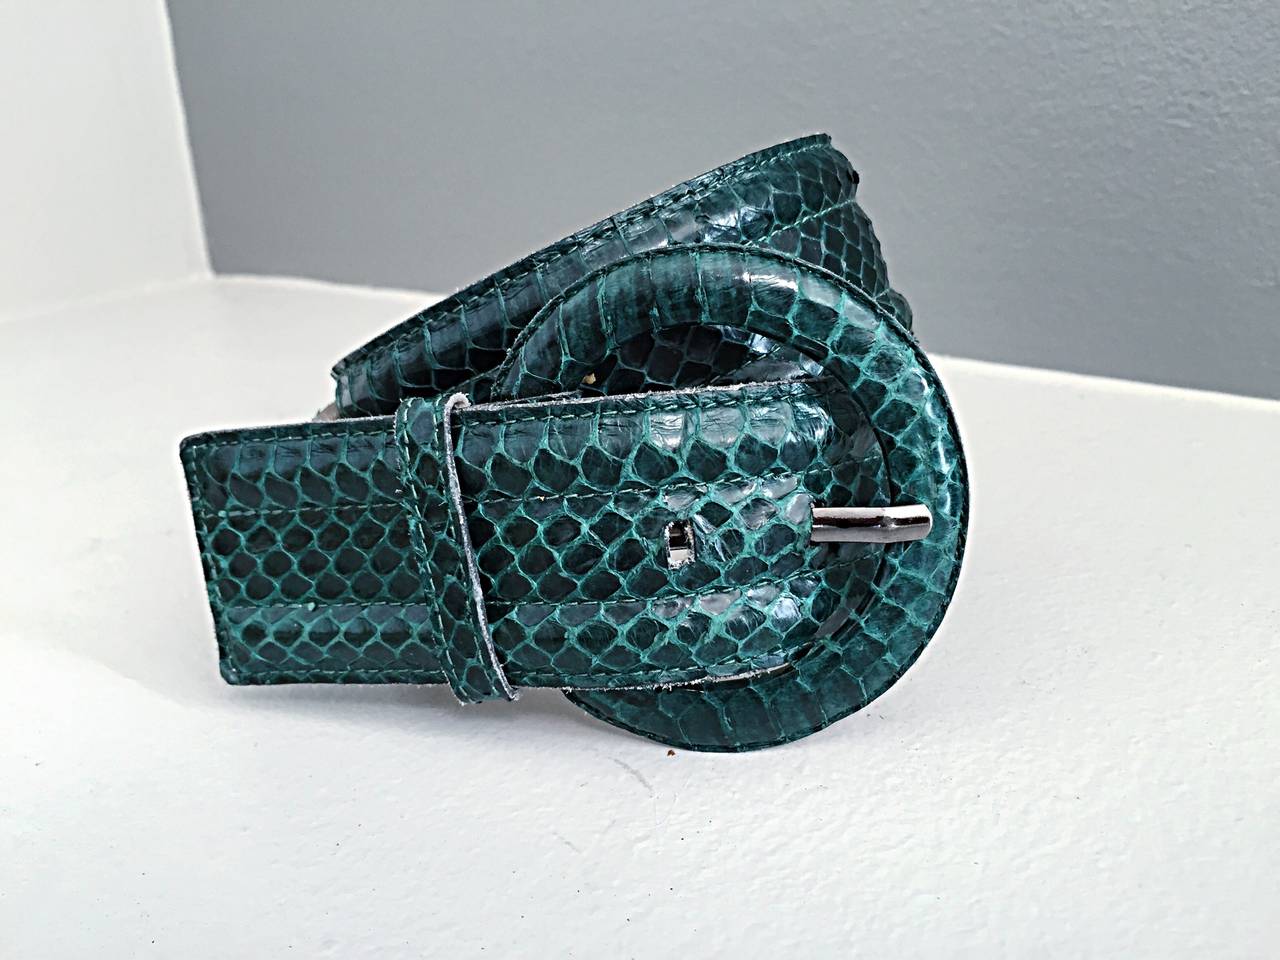 Statement worthy vintage Yves Saint Laurent green python belt! Vibrant green color, with the finest farm-raised python skin. Significant width. Goes with pretty much everything, and can easily be dressed up or down. Lined with vacceta leather.